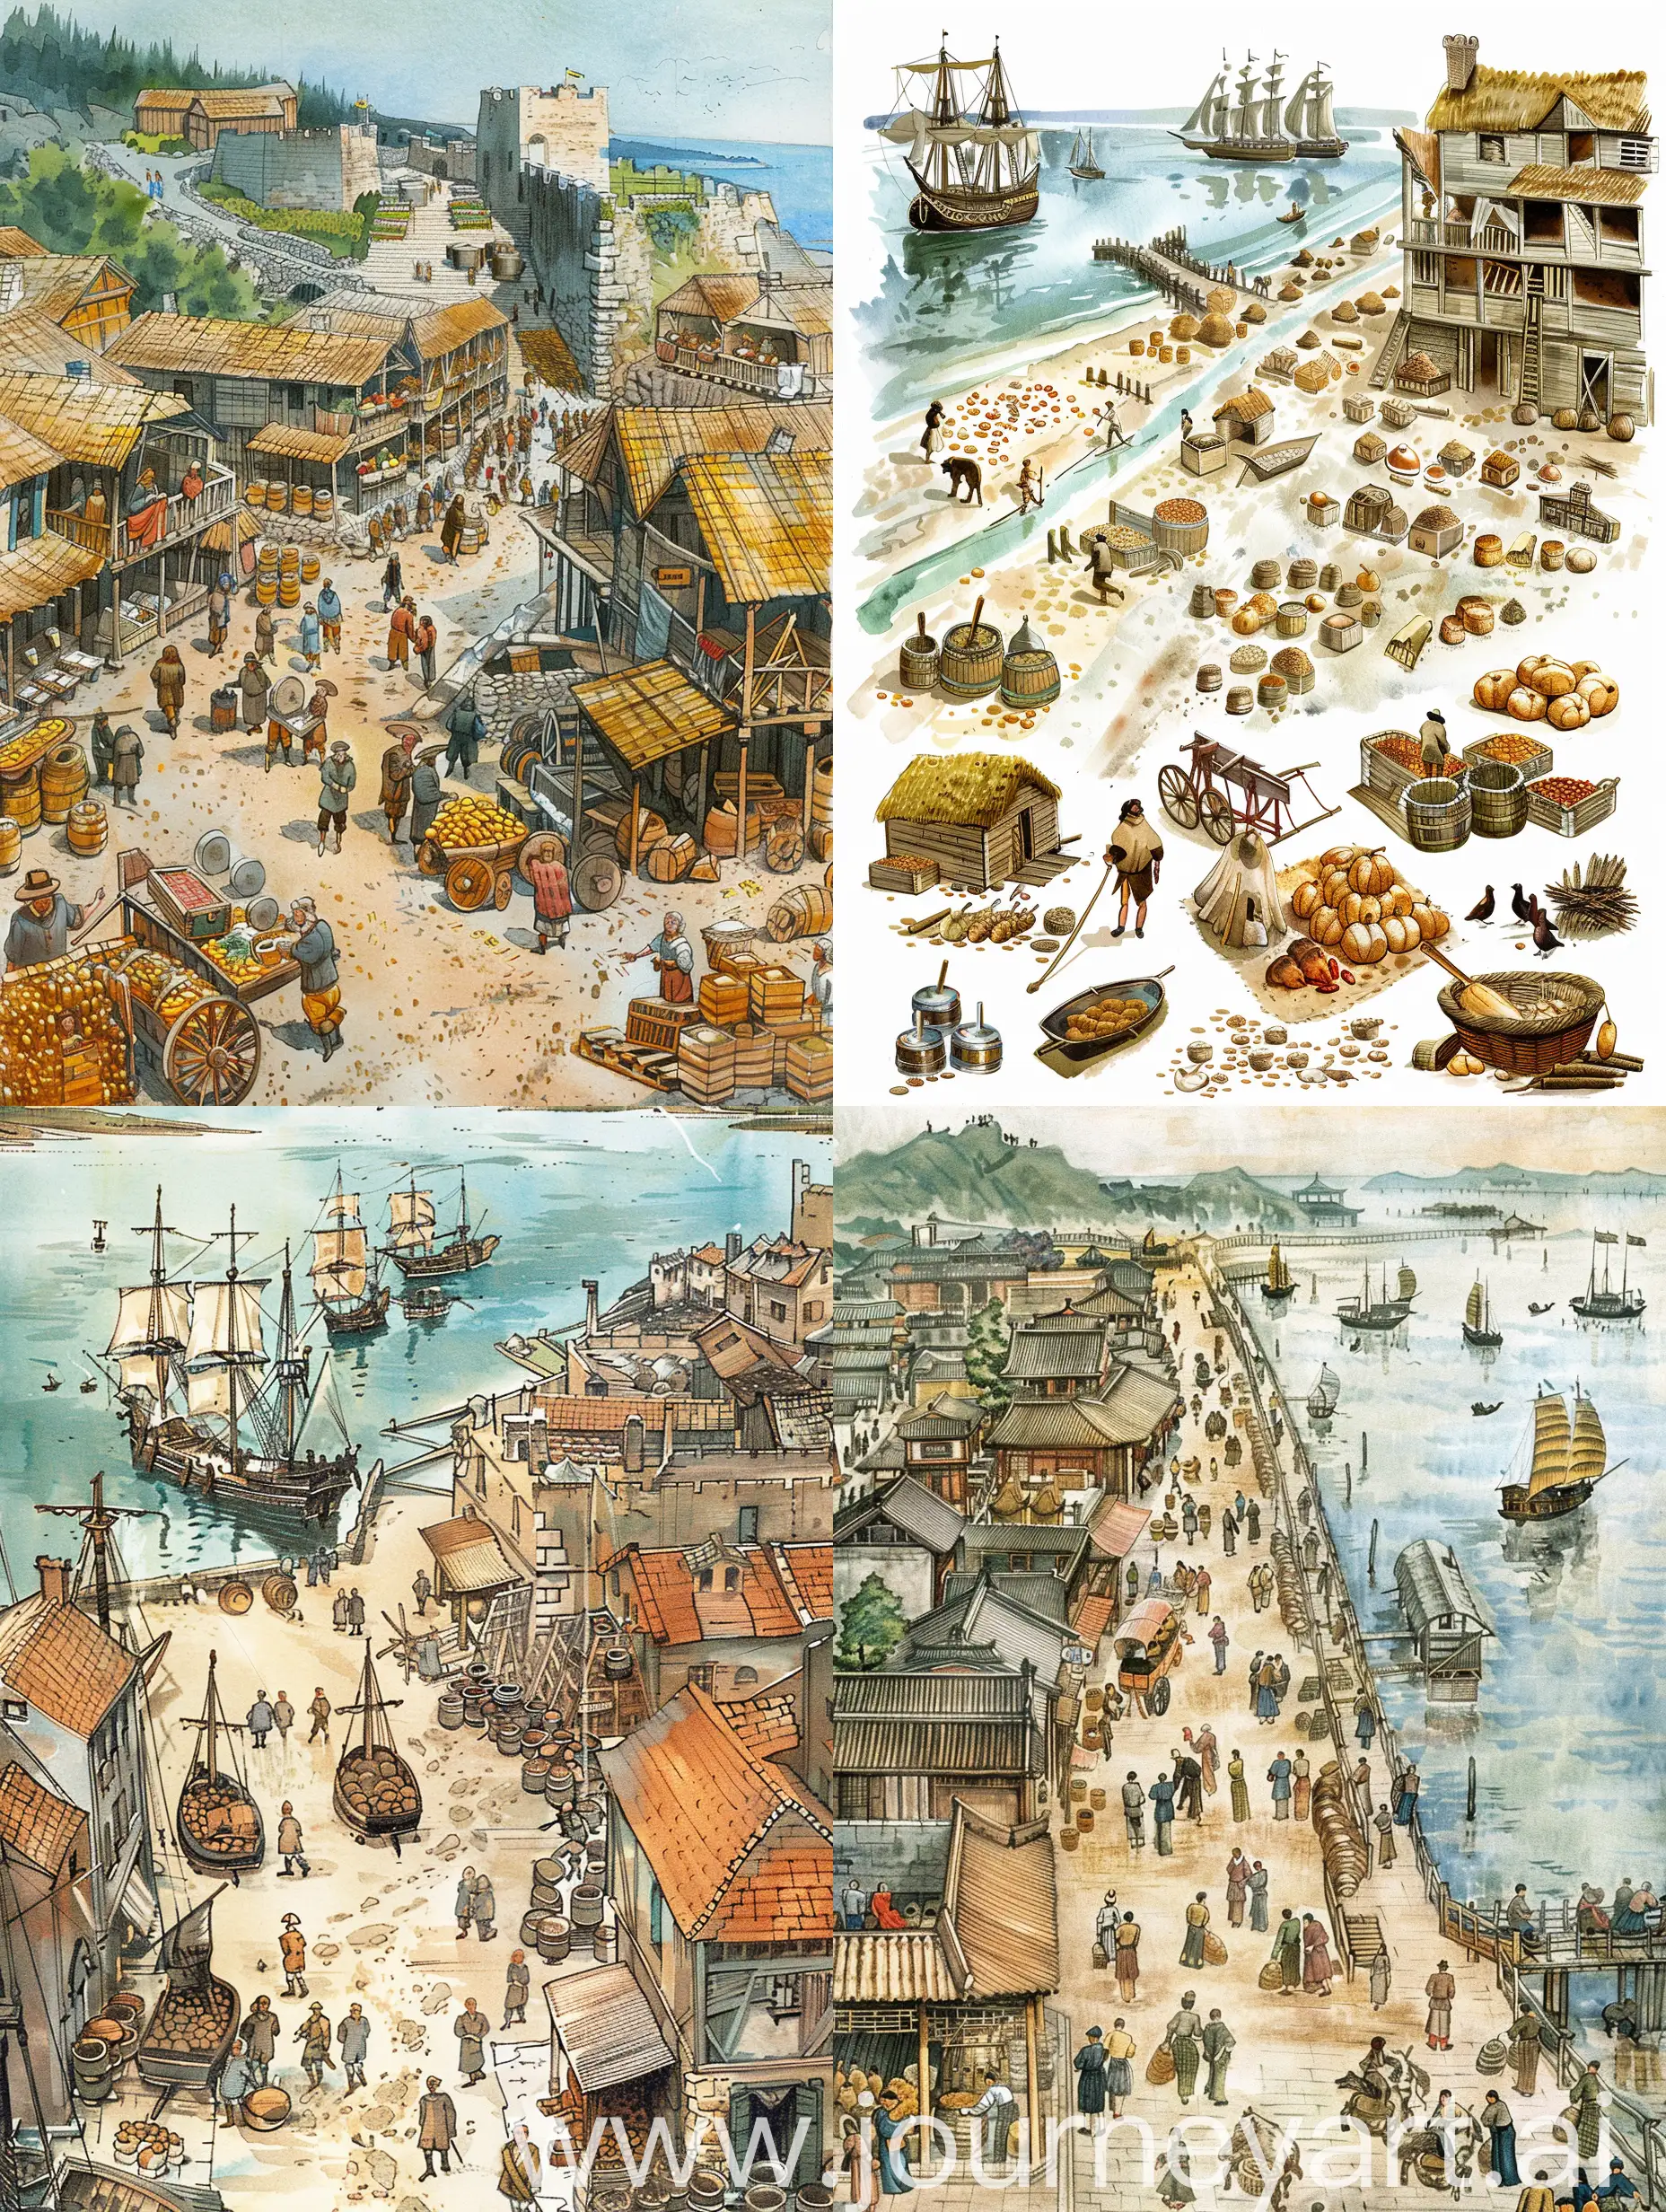 illustration of how trade developed over the centuries